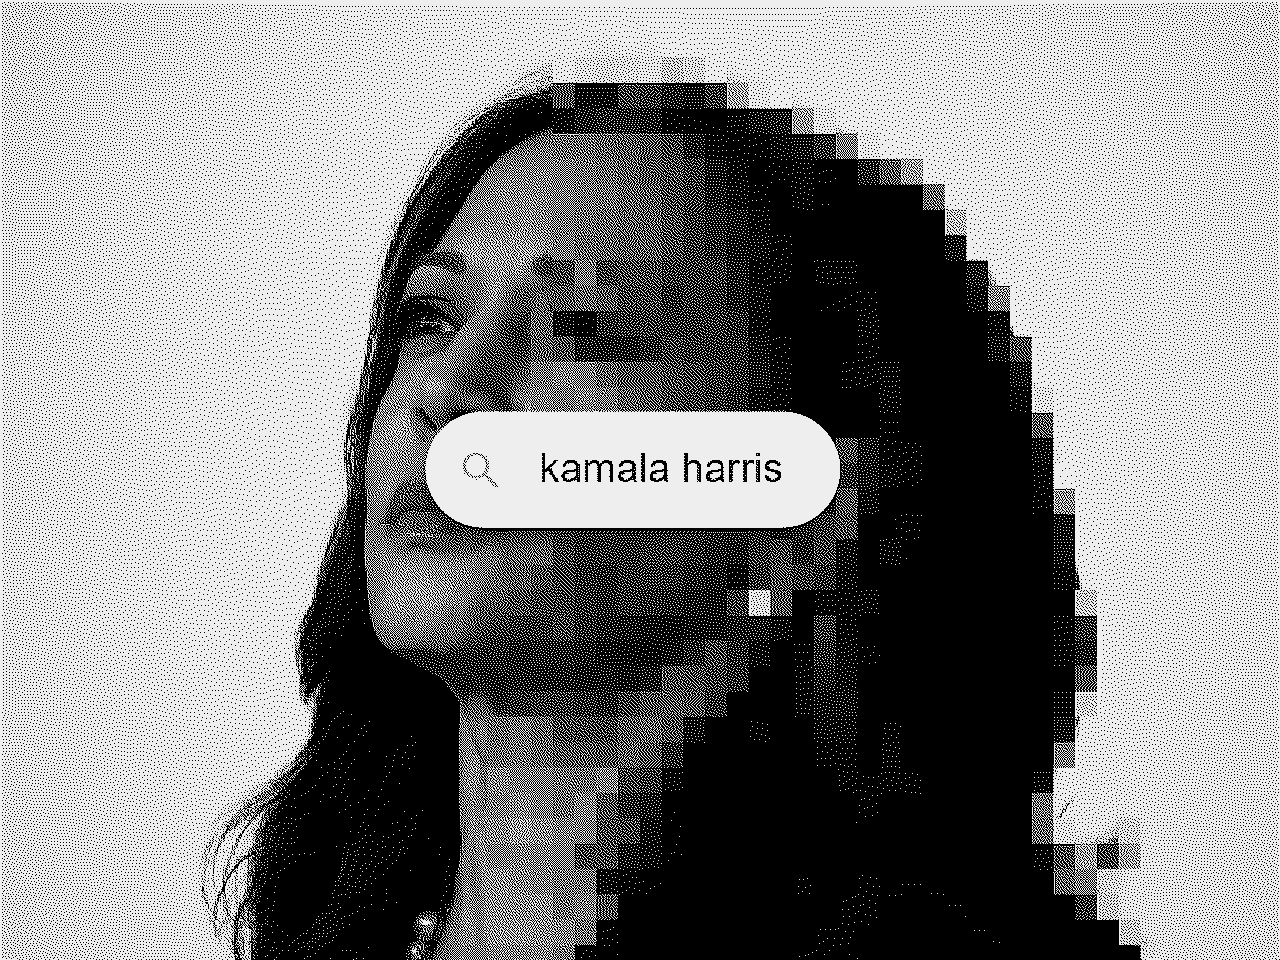 Pornographic deepfakes of Kamala Harris are all over Google Images